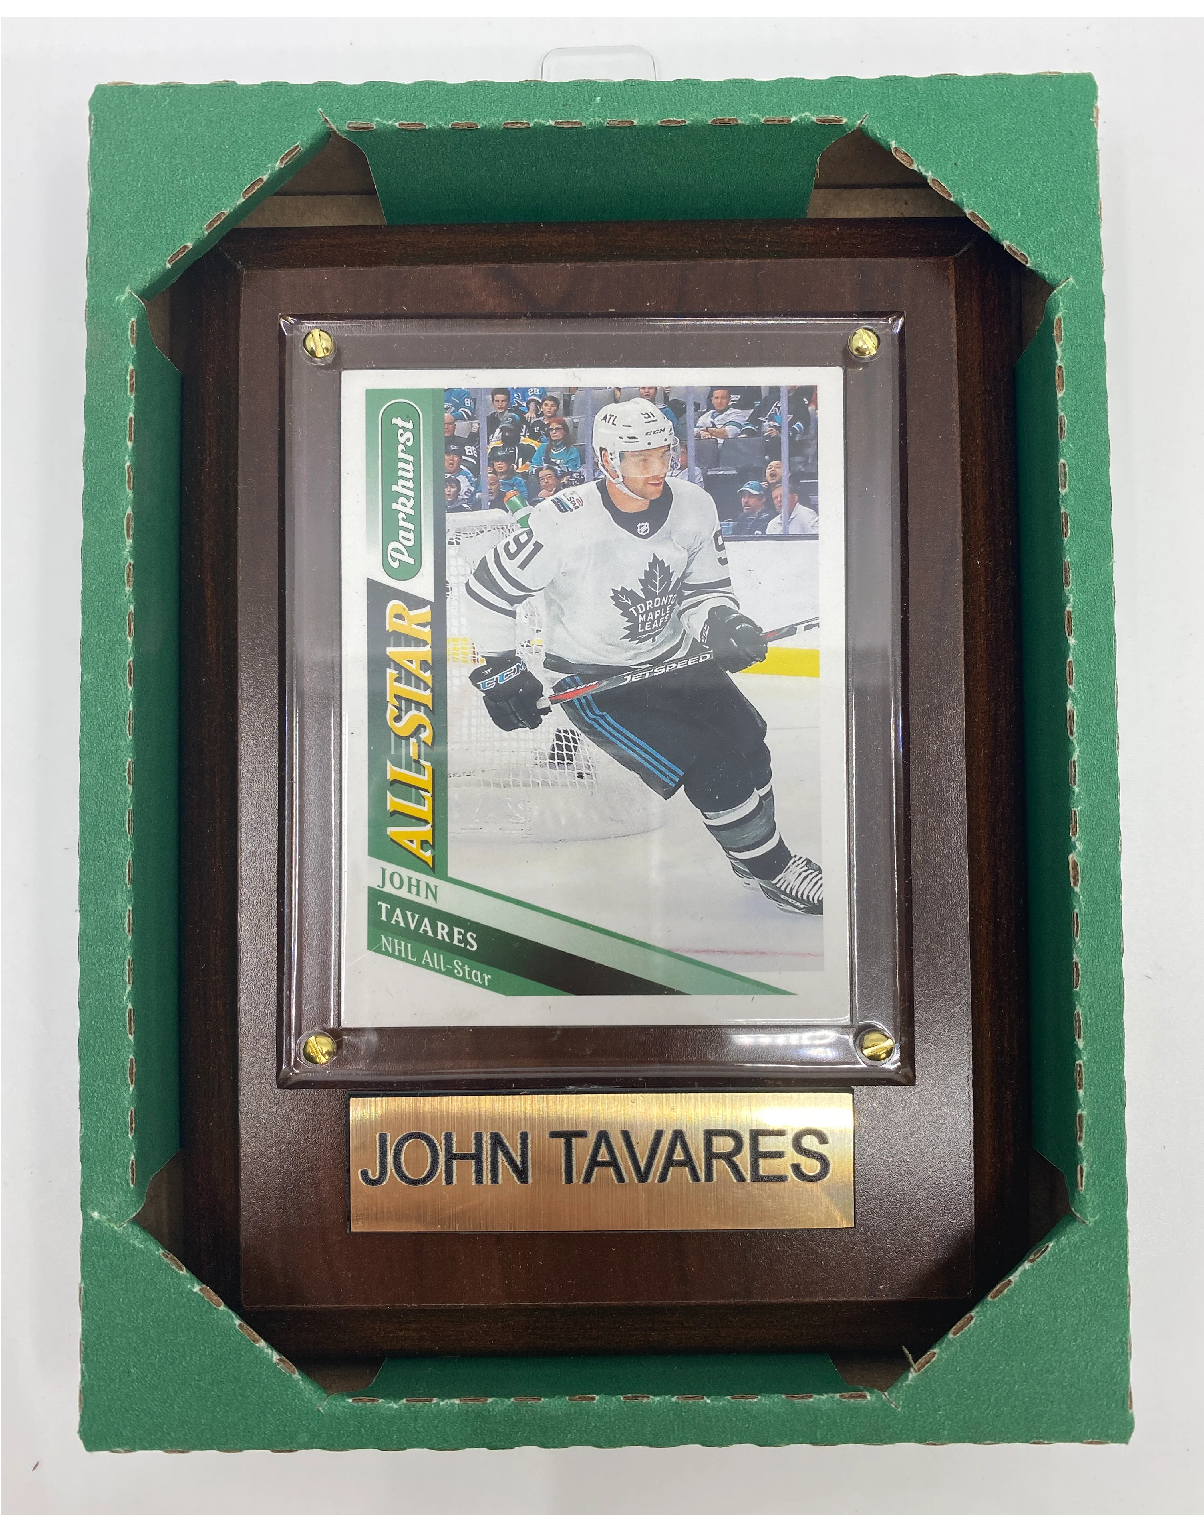 NHL Plaque with card 4x6 Toronto Maple Leafs - John Tavares (Randomly Selected, May Not Be Pictured)